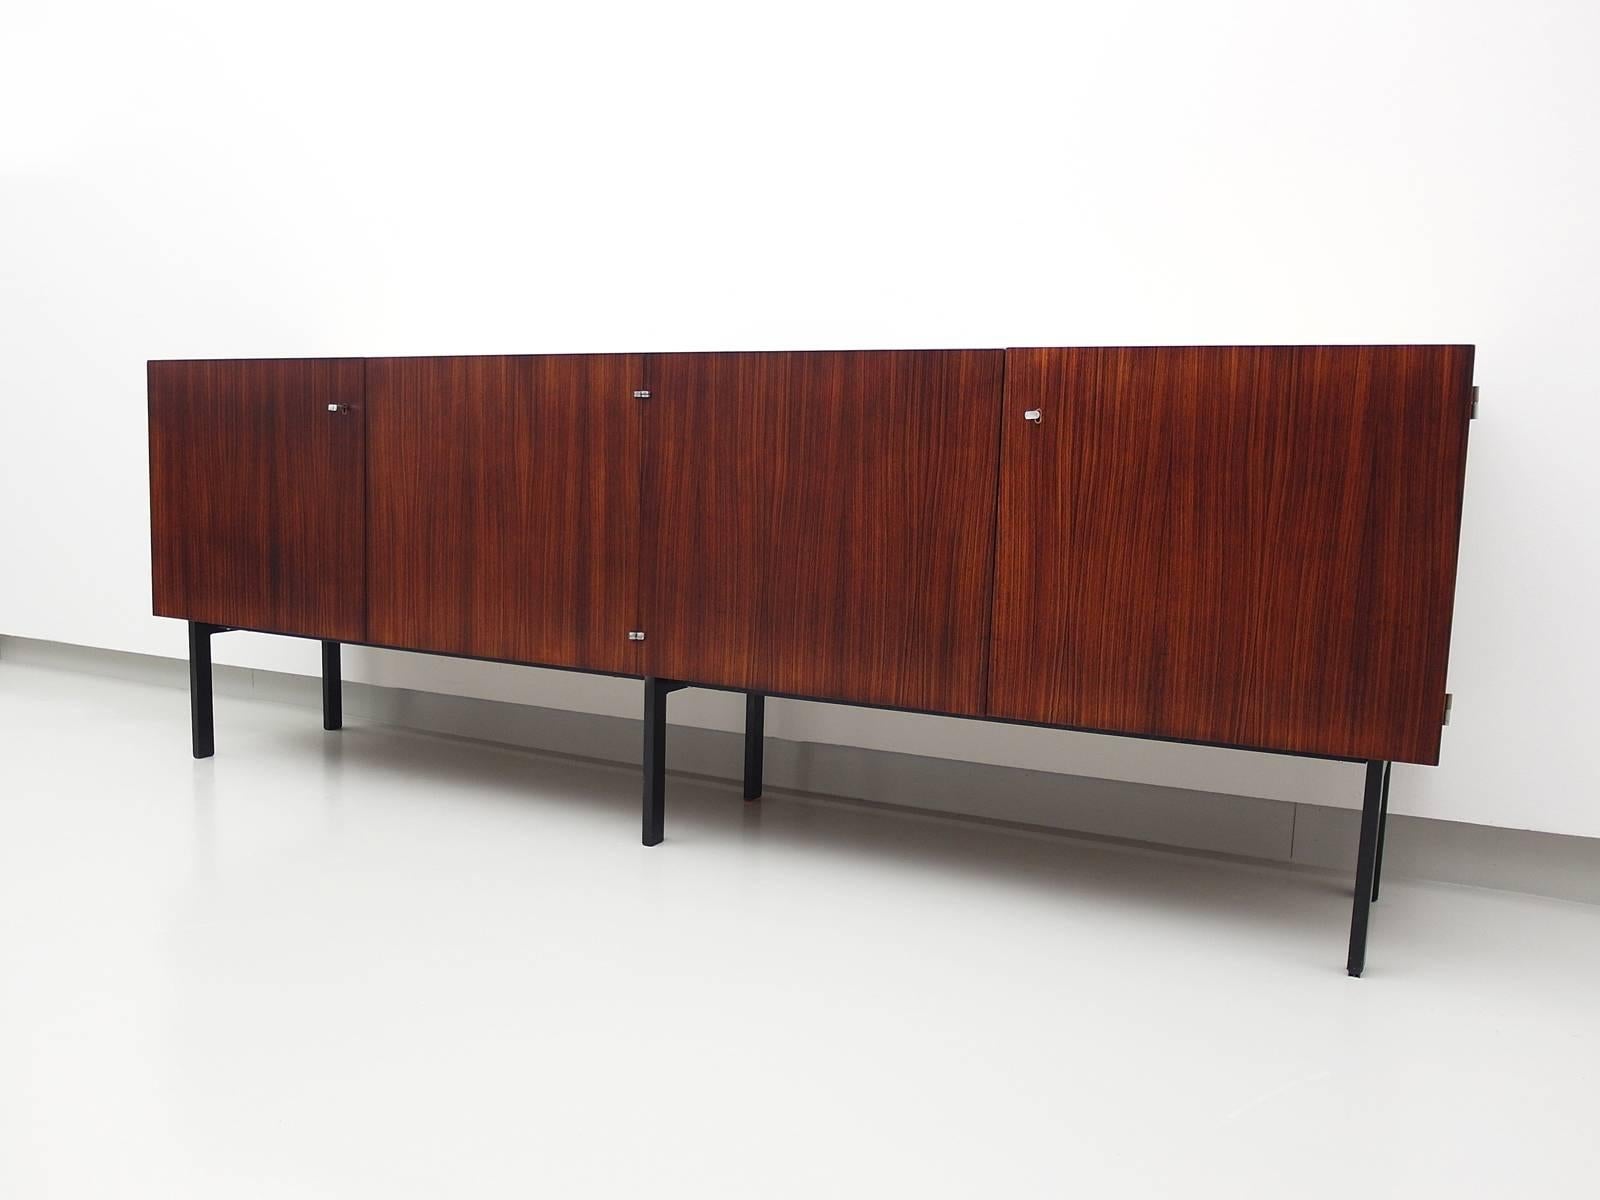 French Rosewood Sideboard Attributed to Etienne Fermigier for Meubles et Fonction, 1961 For Sale